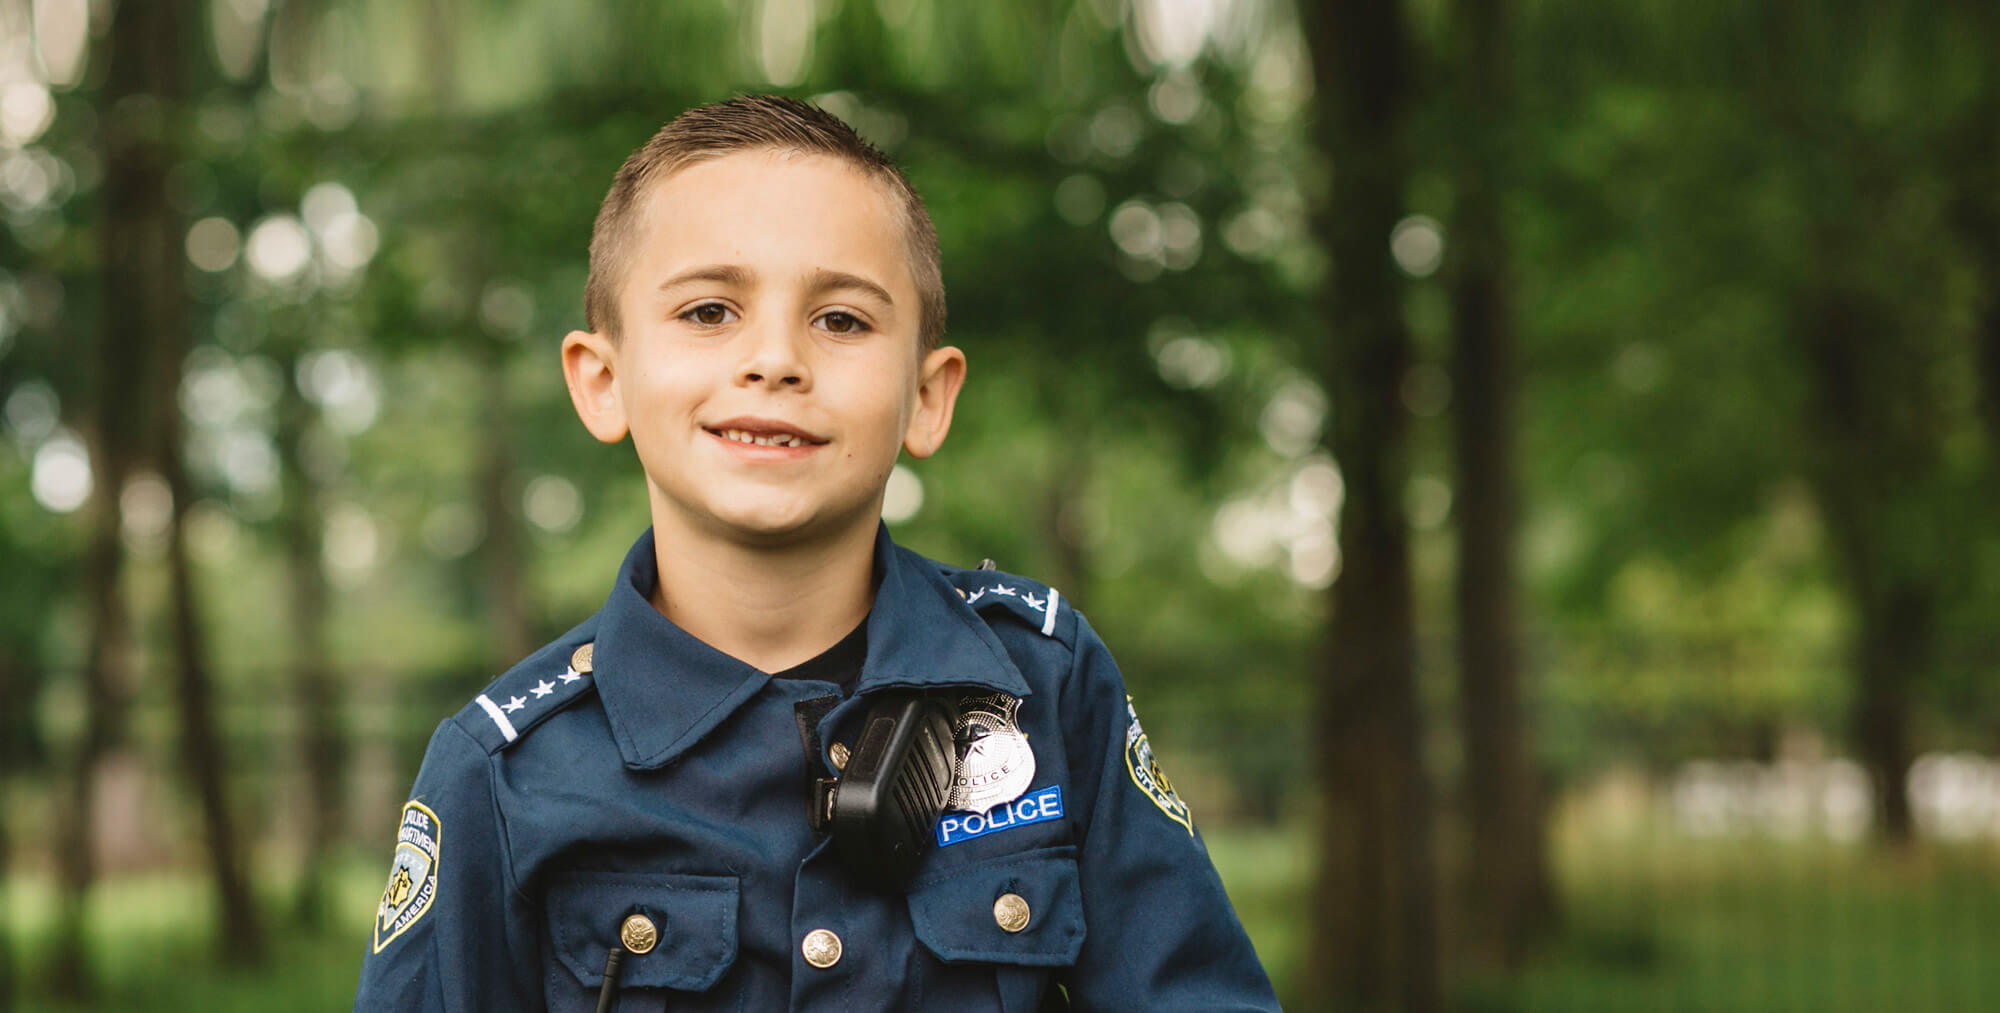 Little boy wearing a police costume and smiling